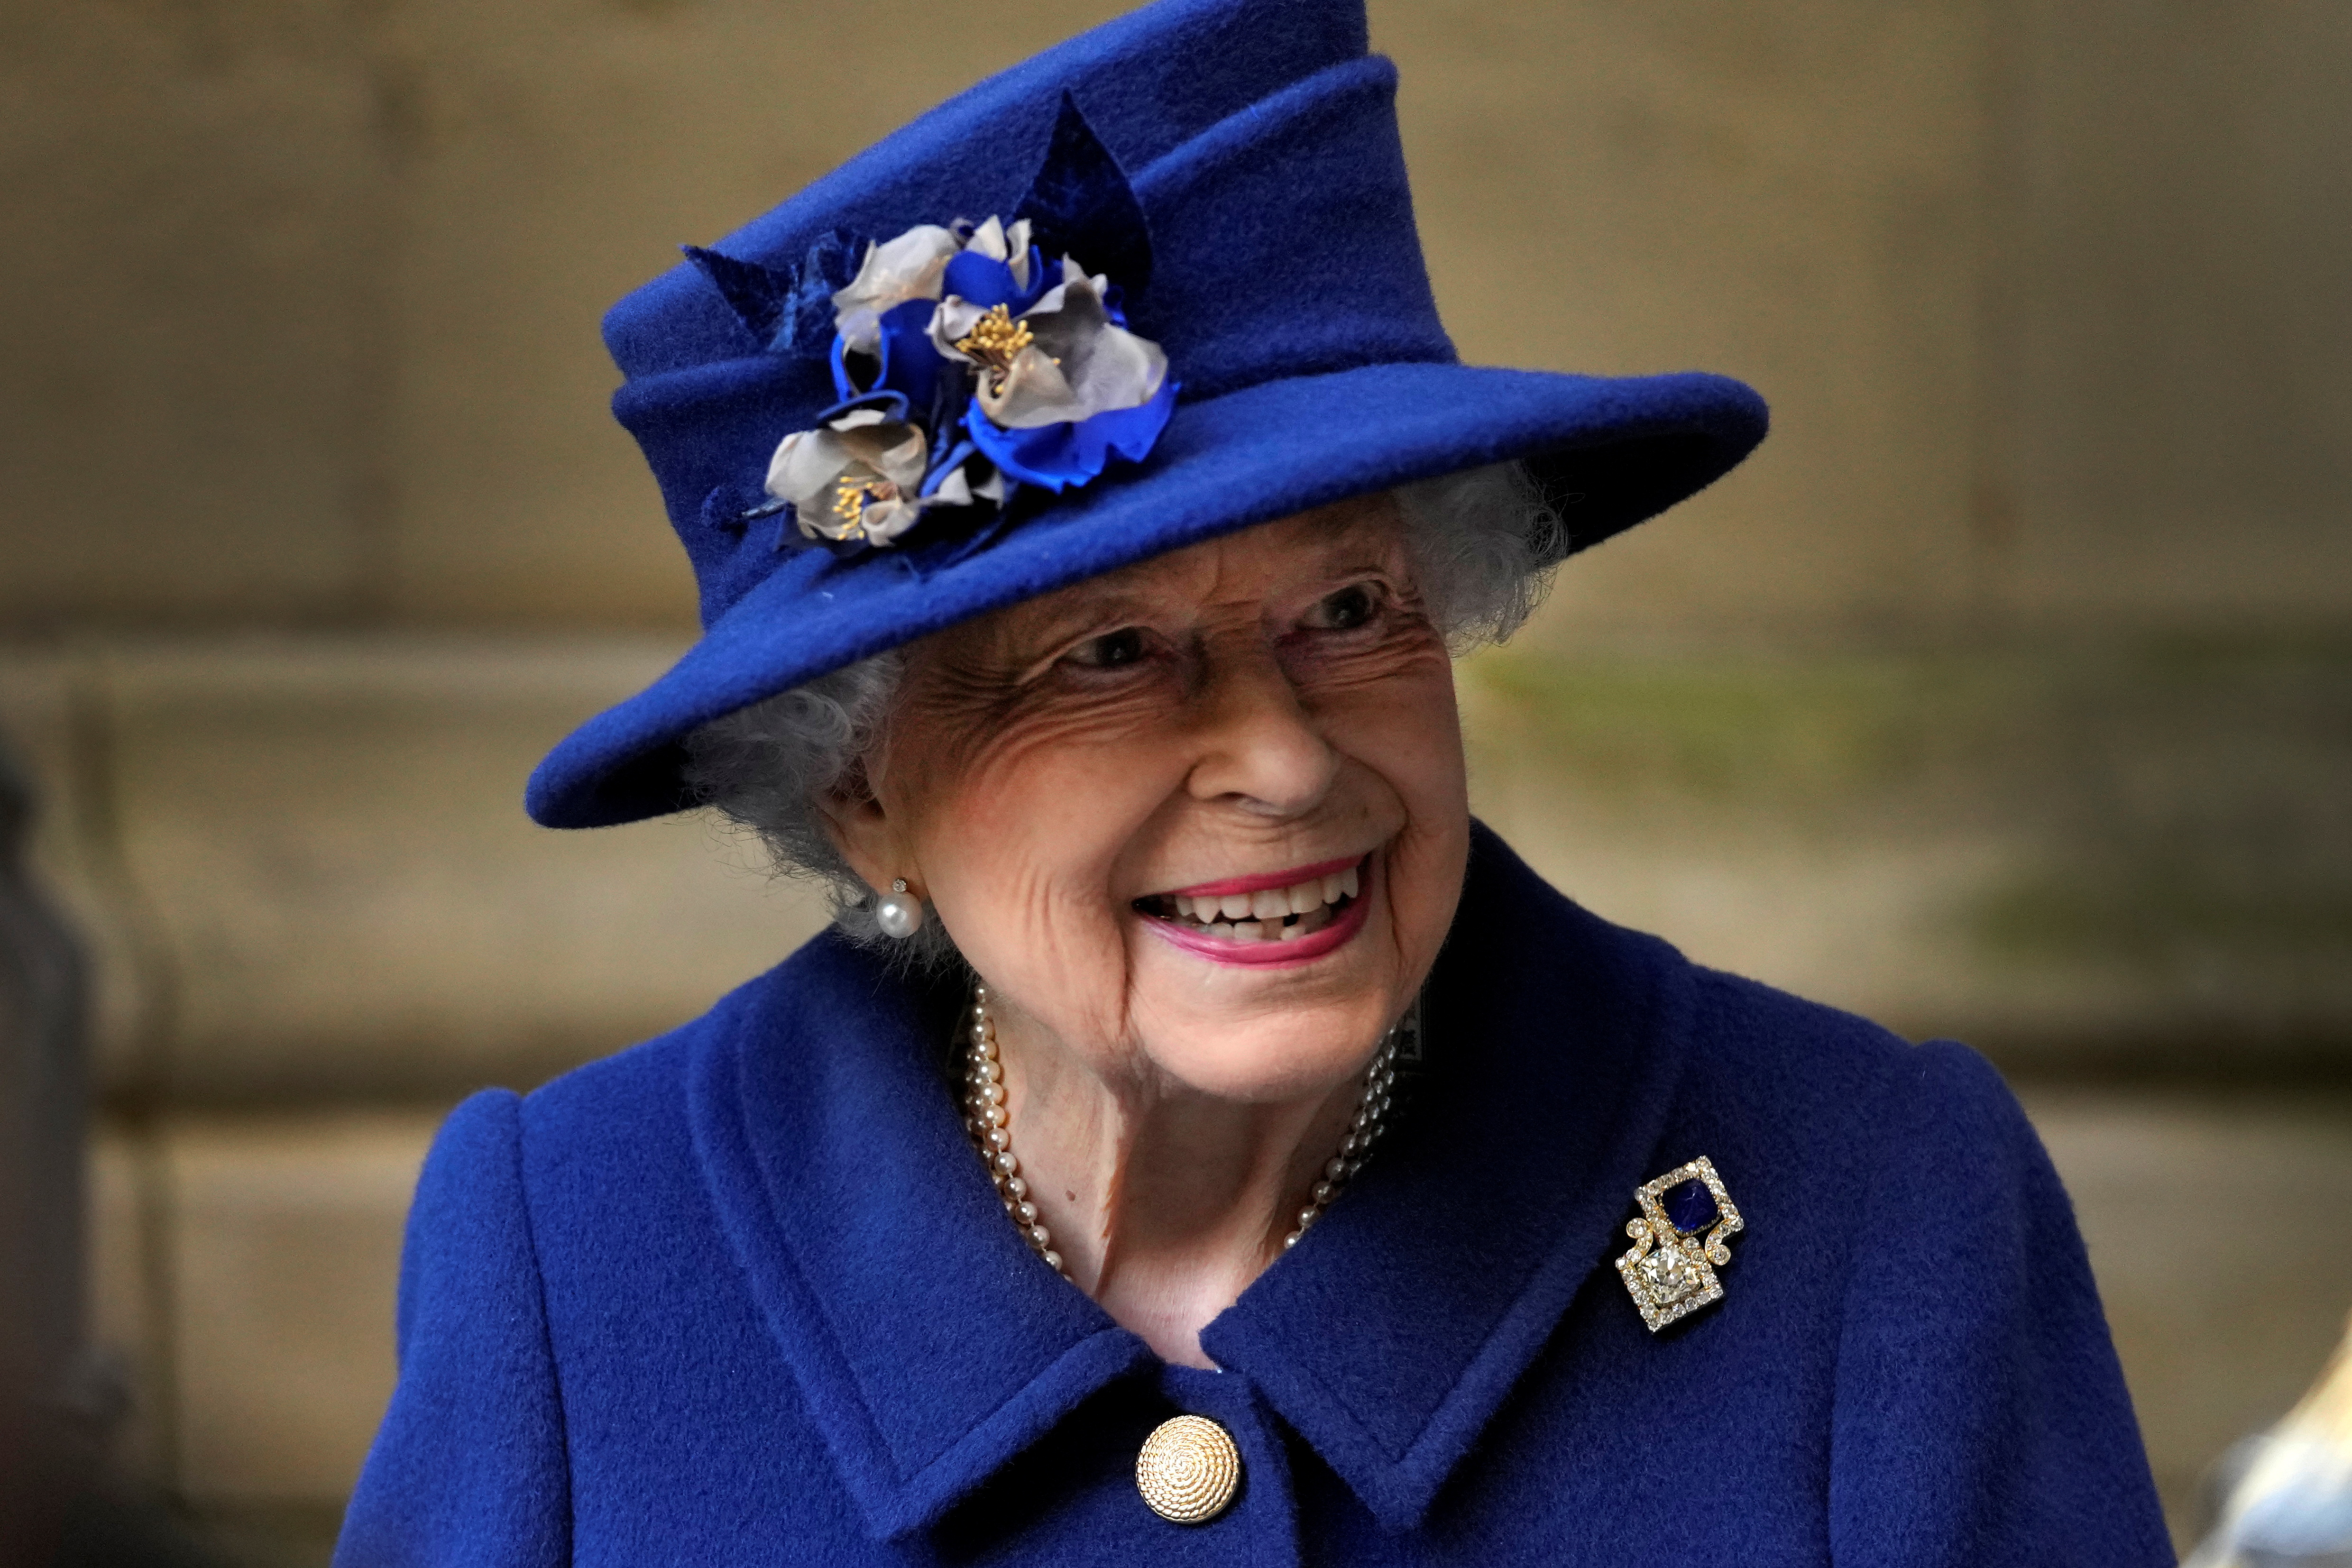 Britain's Queen Elizabeth leaves after a Service of Thanksgiving to mark the Centenary of the Royal British Legion at Westminster Abbey, London, Britain October 12, 2021. Frank Augstein/Pool via REUTERS